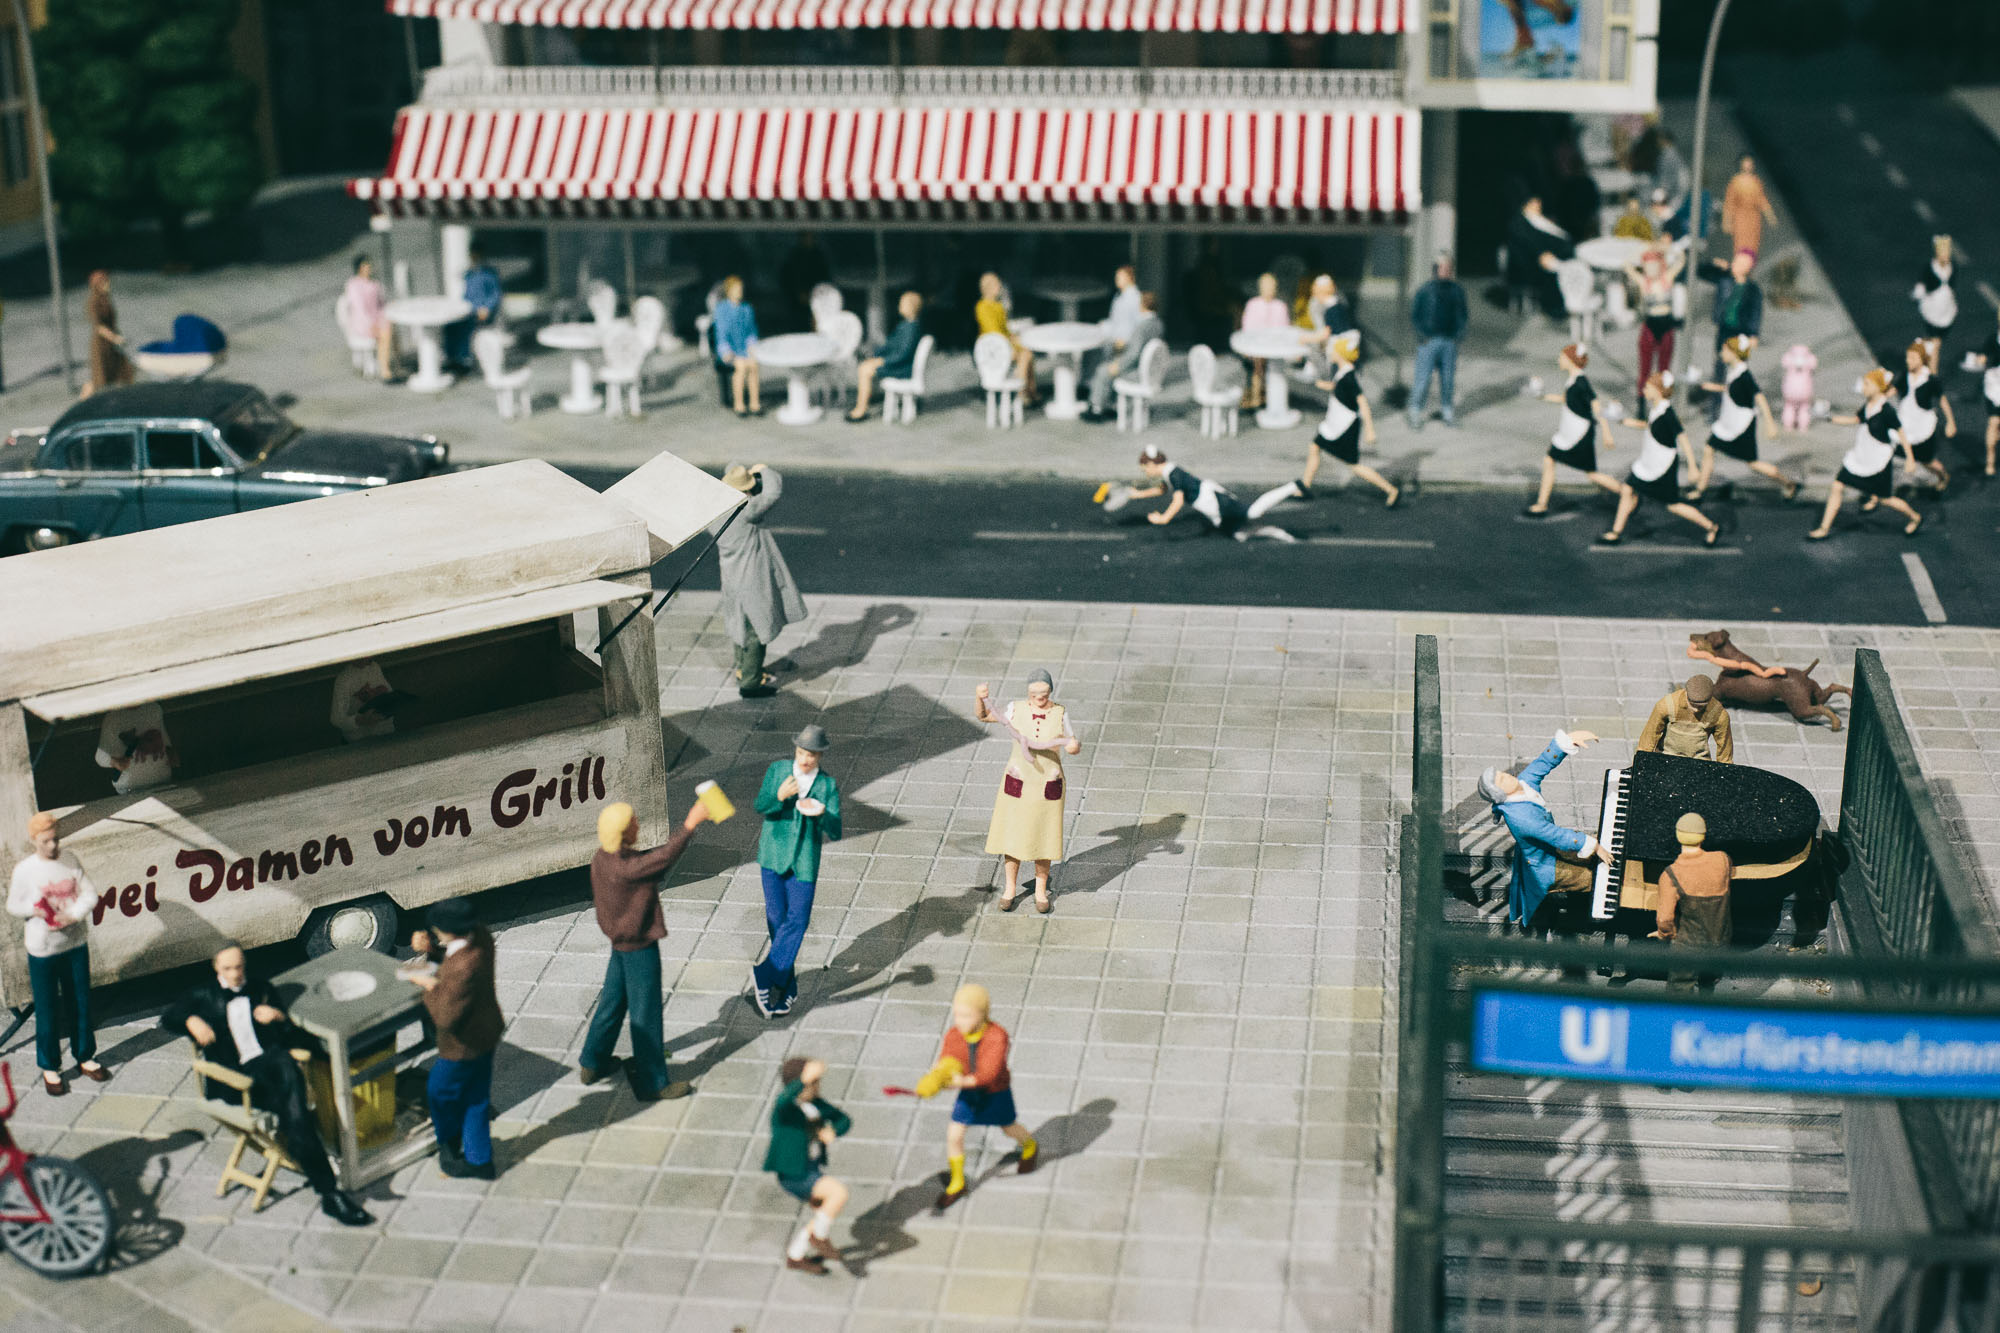 In Little BIG City Berlin there are many different miniature inhabitants